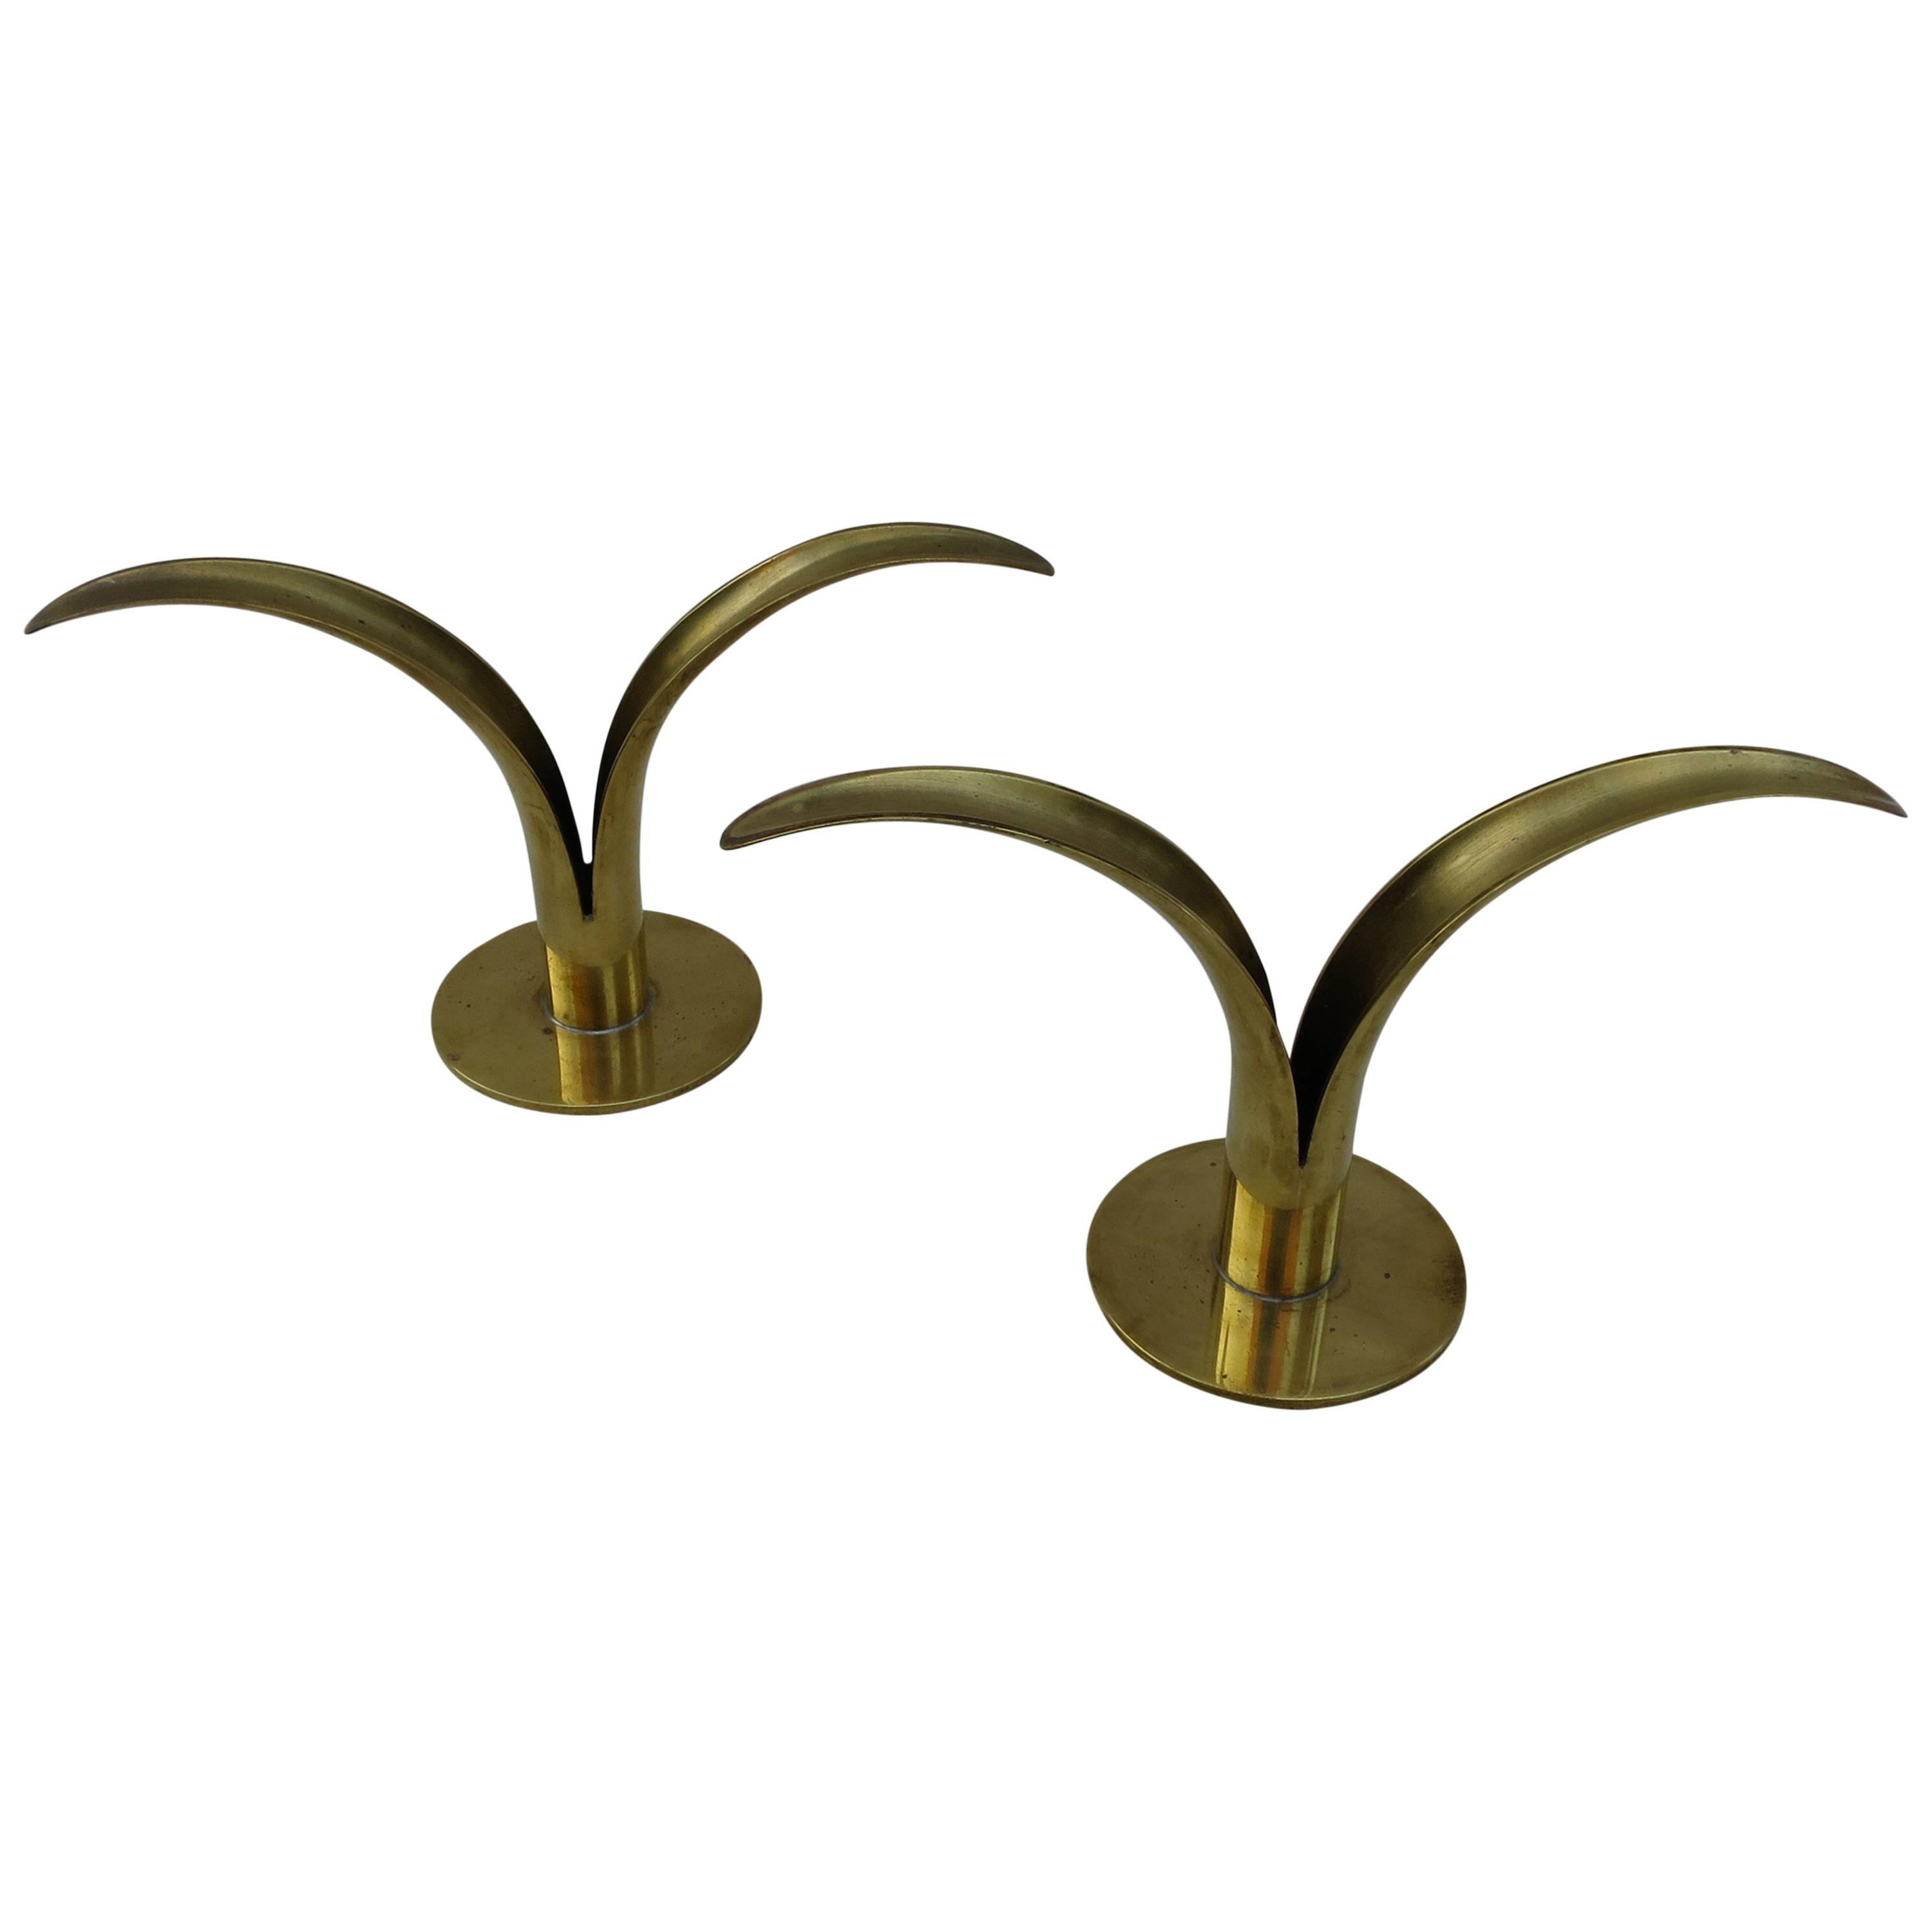 Ystad Brass Candlestick Holders For Sale